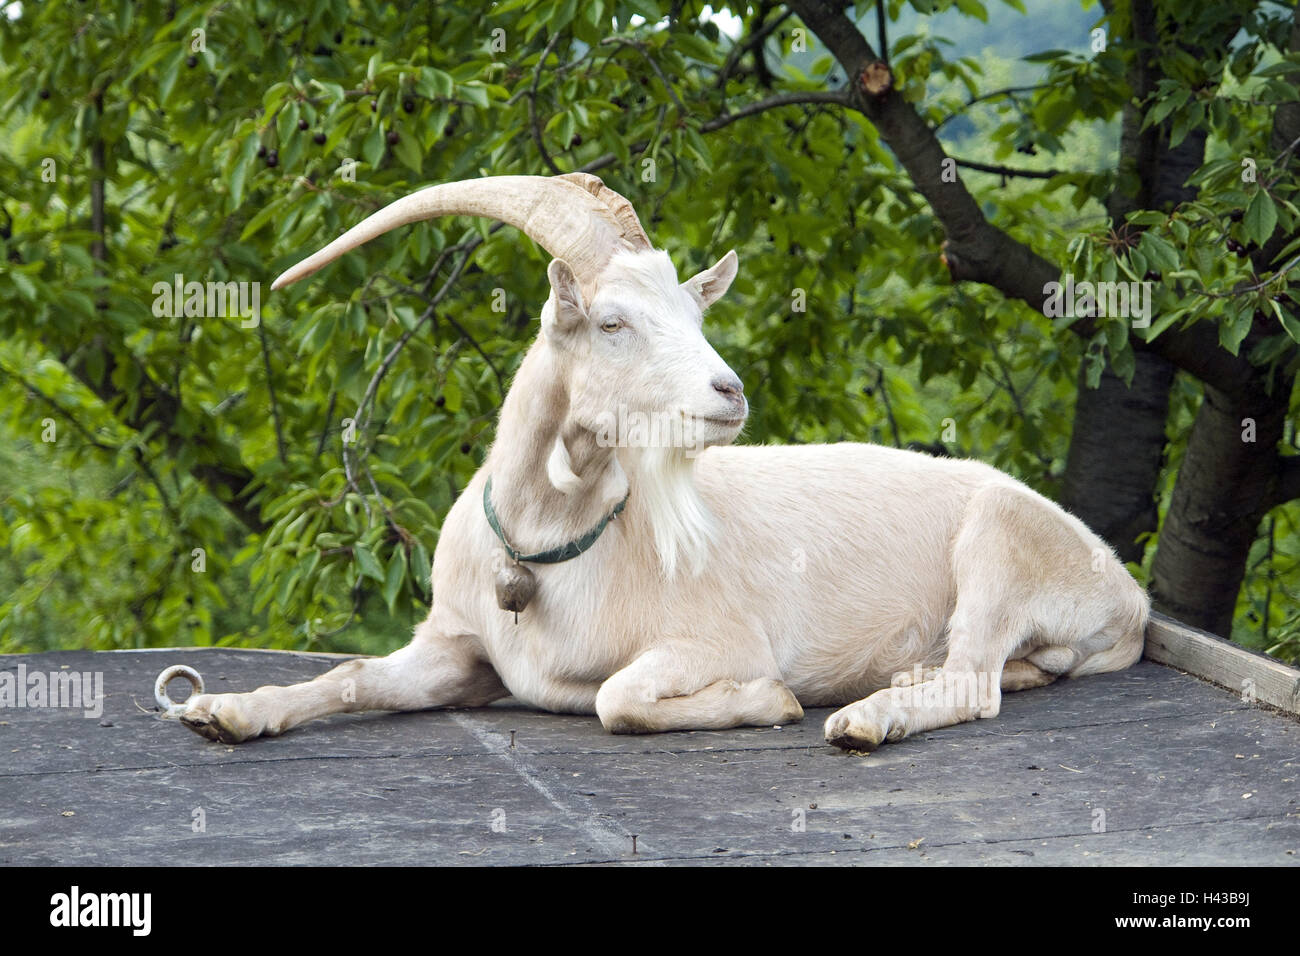 Billy goat, white, lie, outside, animal, mammal, house goat, manly, vaulting horse, benefit animal, goat's beard, open-air museum, house goat, horns, benefit animal, agriculture, summer, Stock Photo